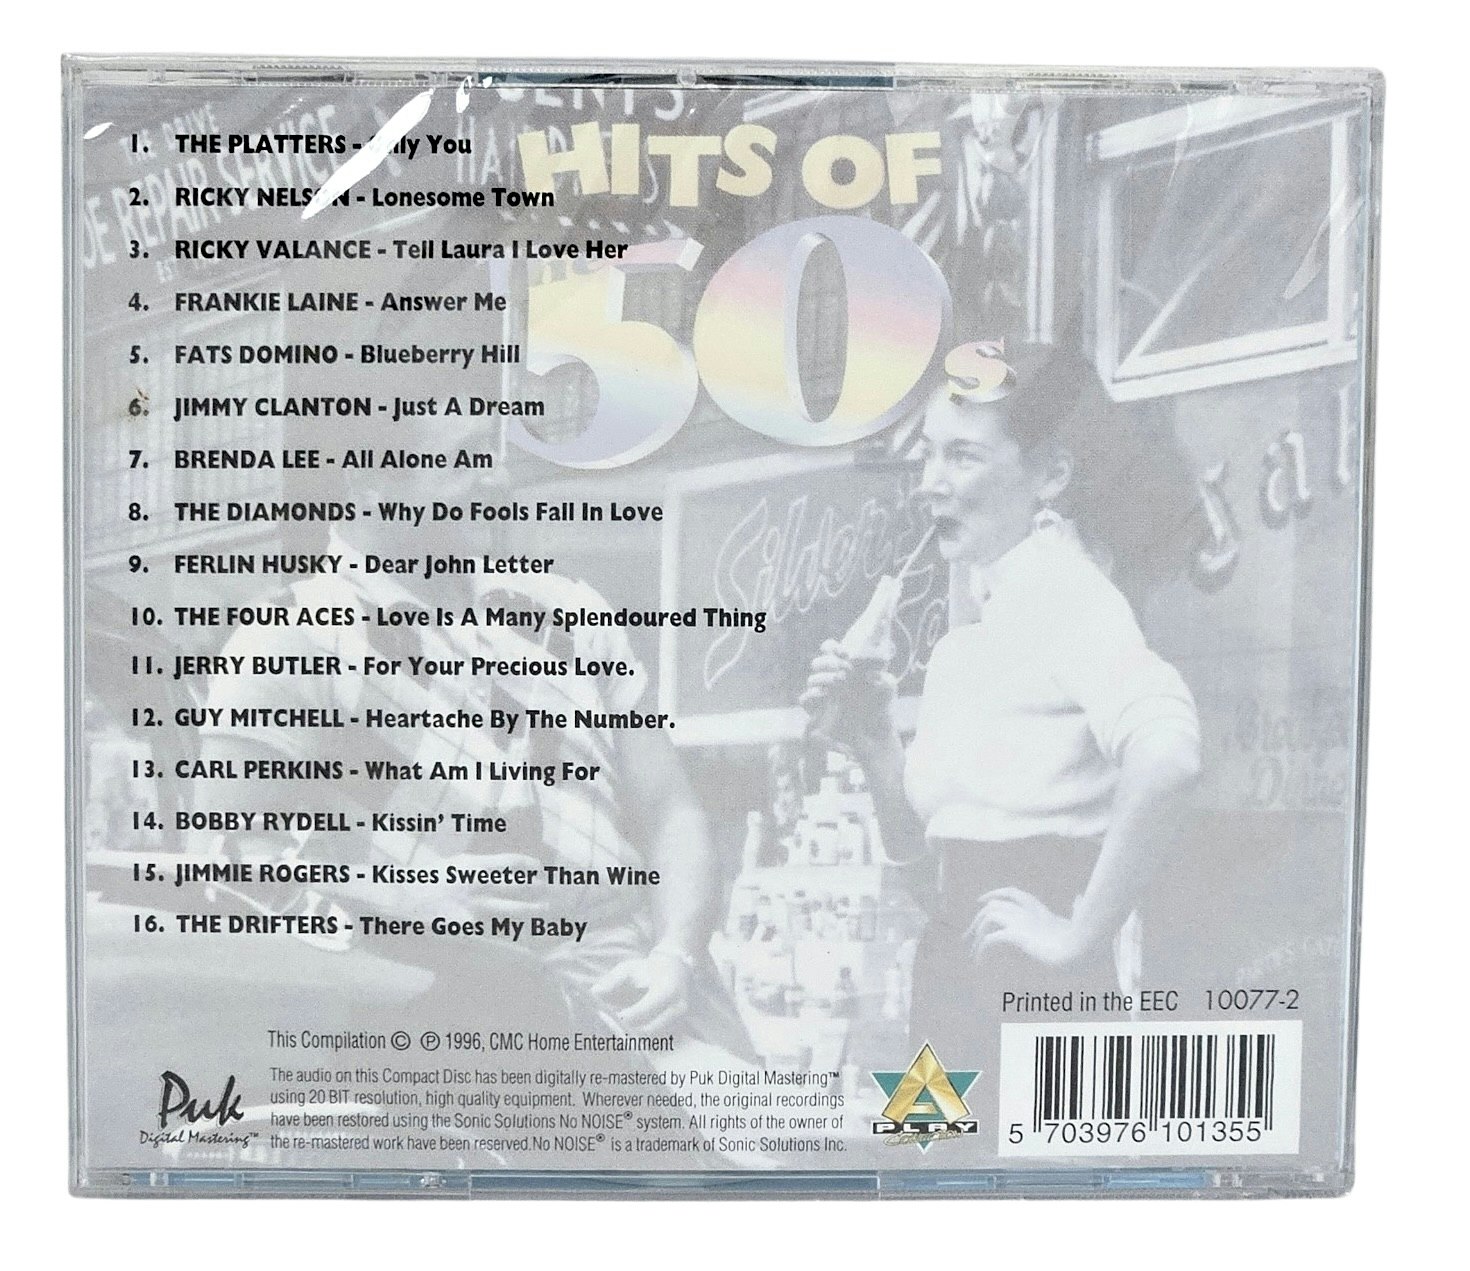 Only You, Hits From The 50s, CD NY